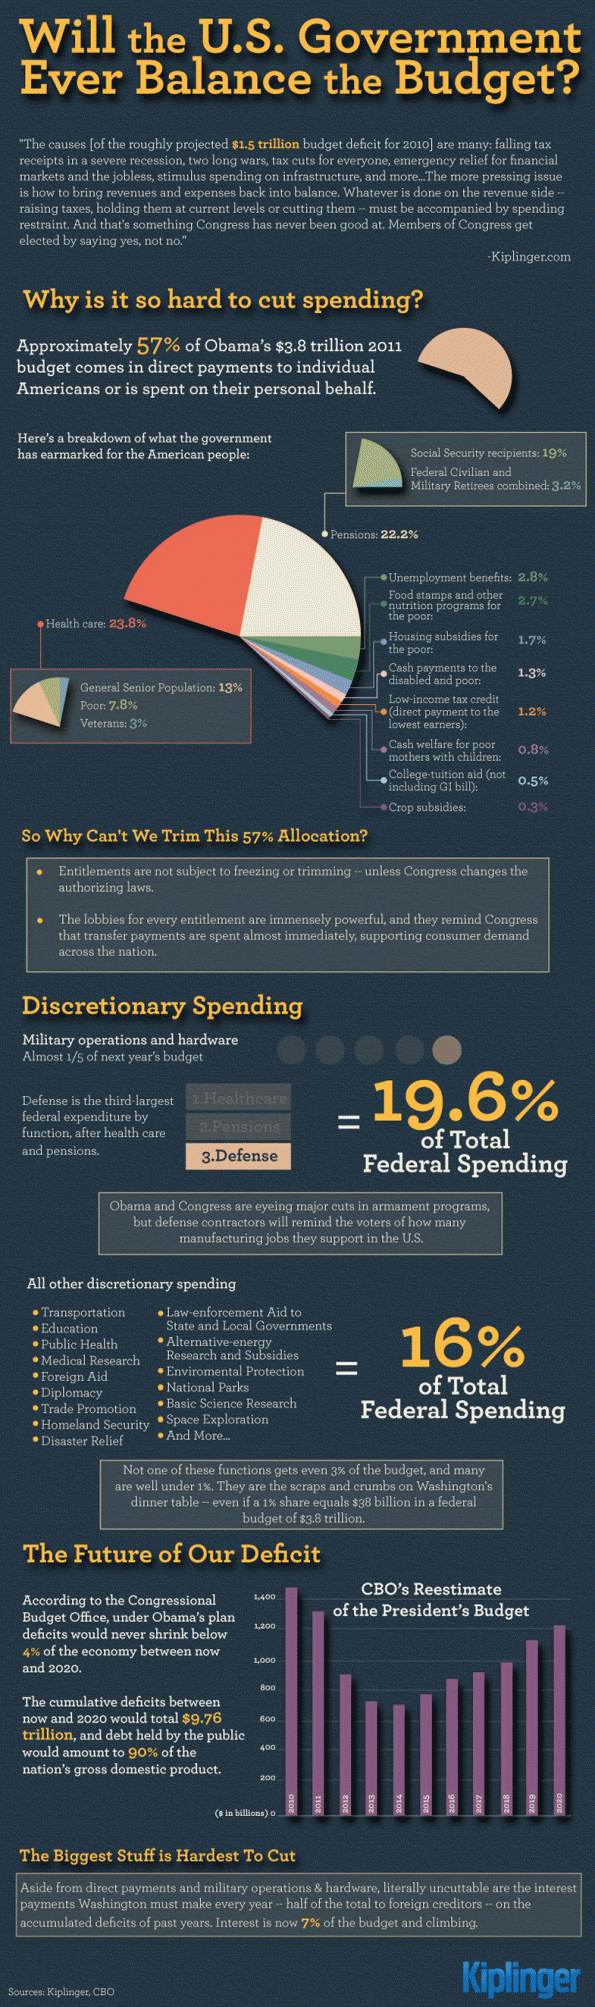 Will the US Government Ever Balance the Budget? Infographic